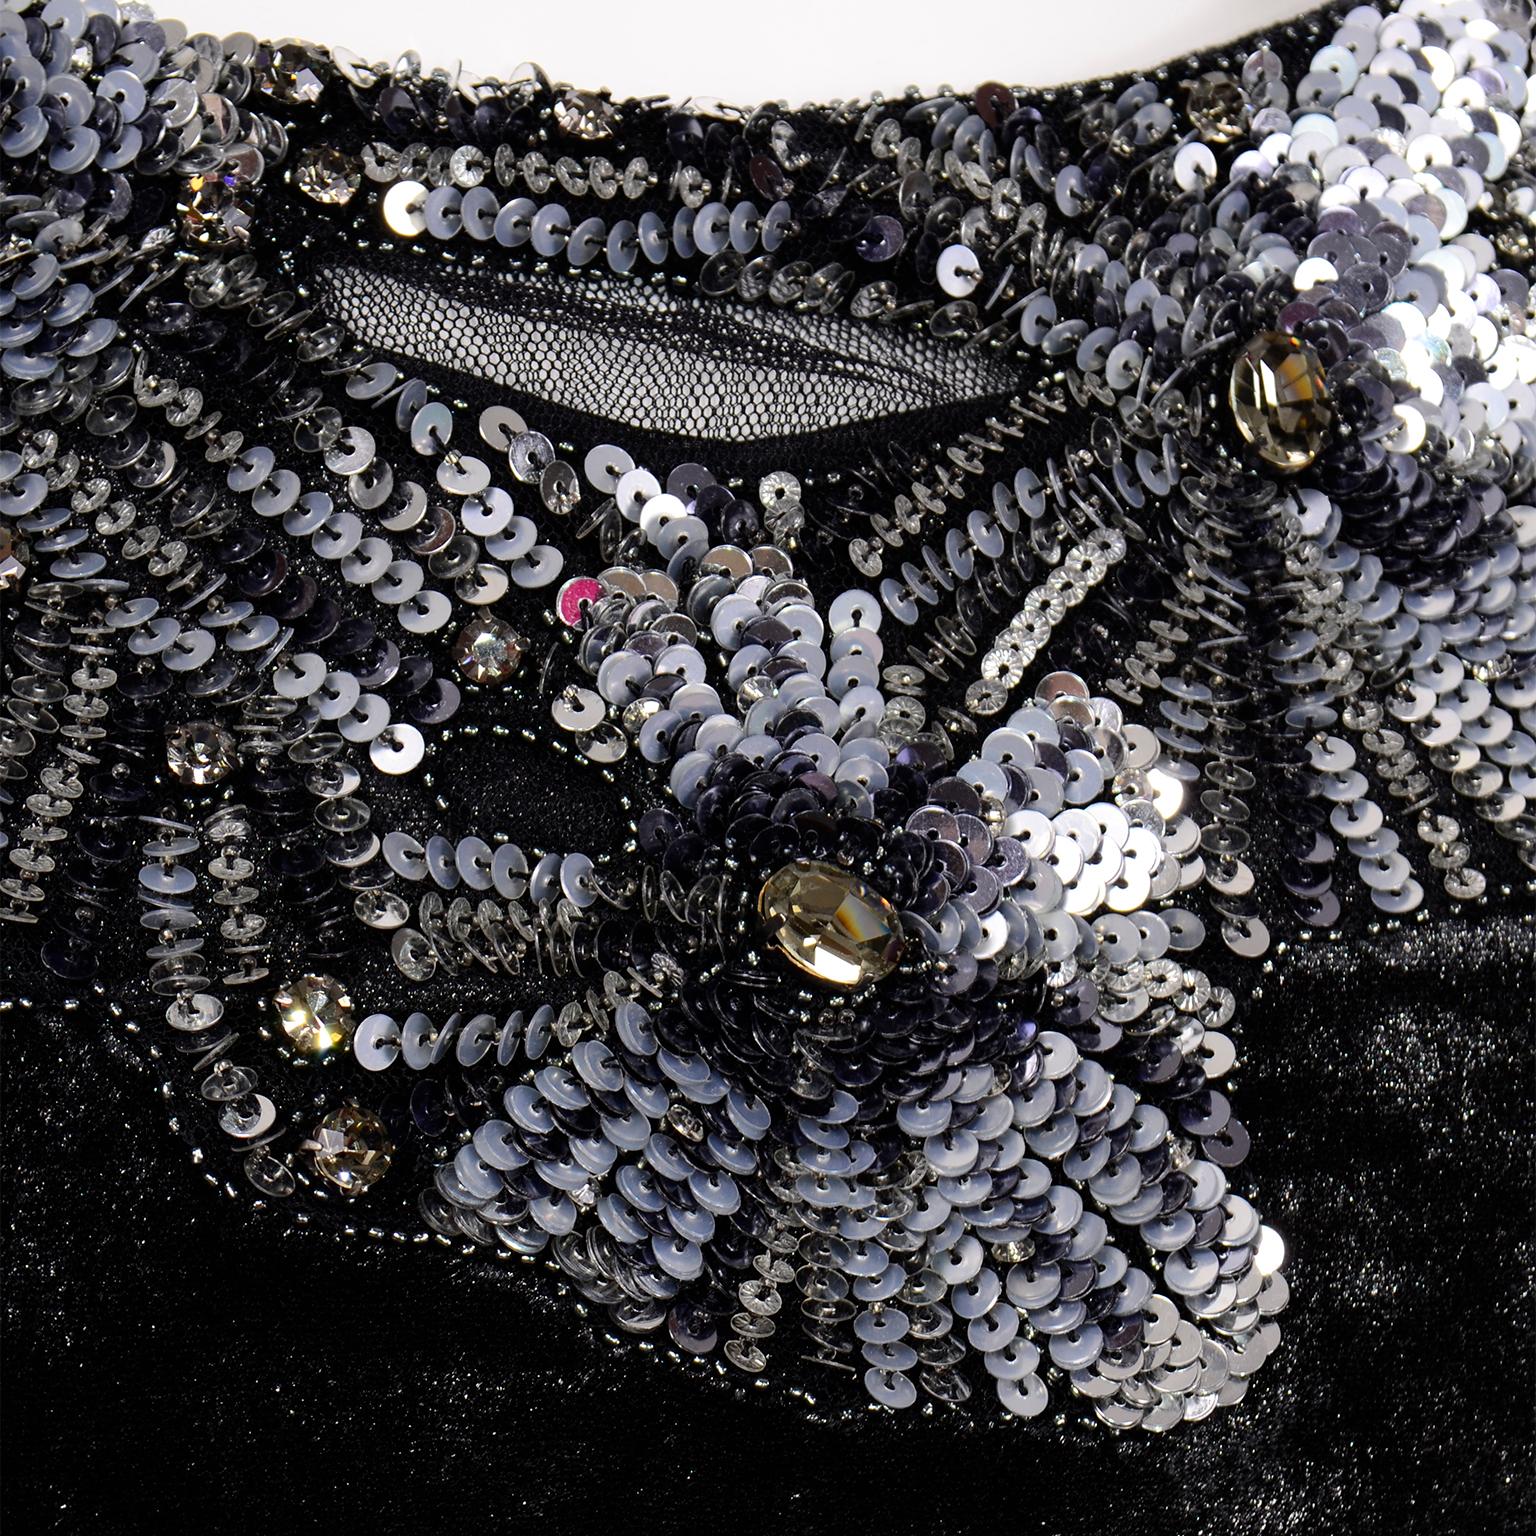 Alberta Ferretti Black Velvet Evening Dress With Sequins and Beads  For Sale 2